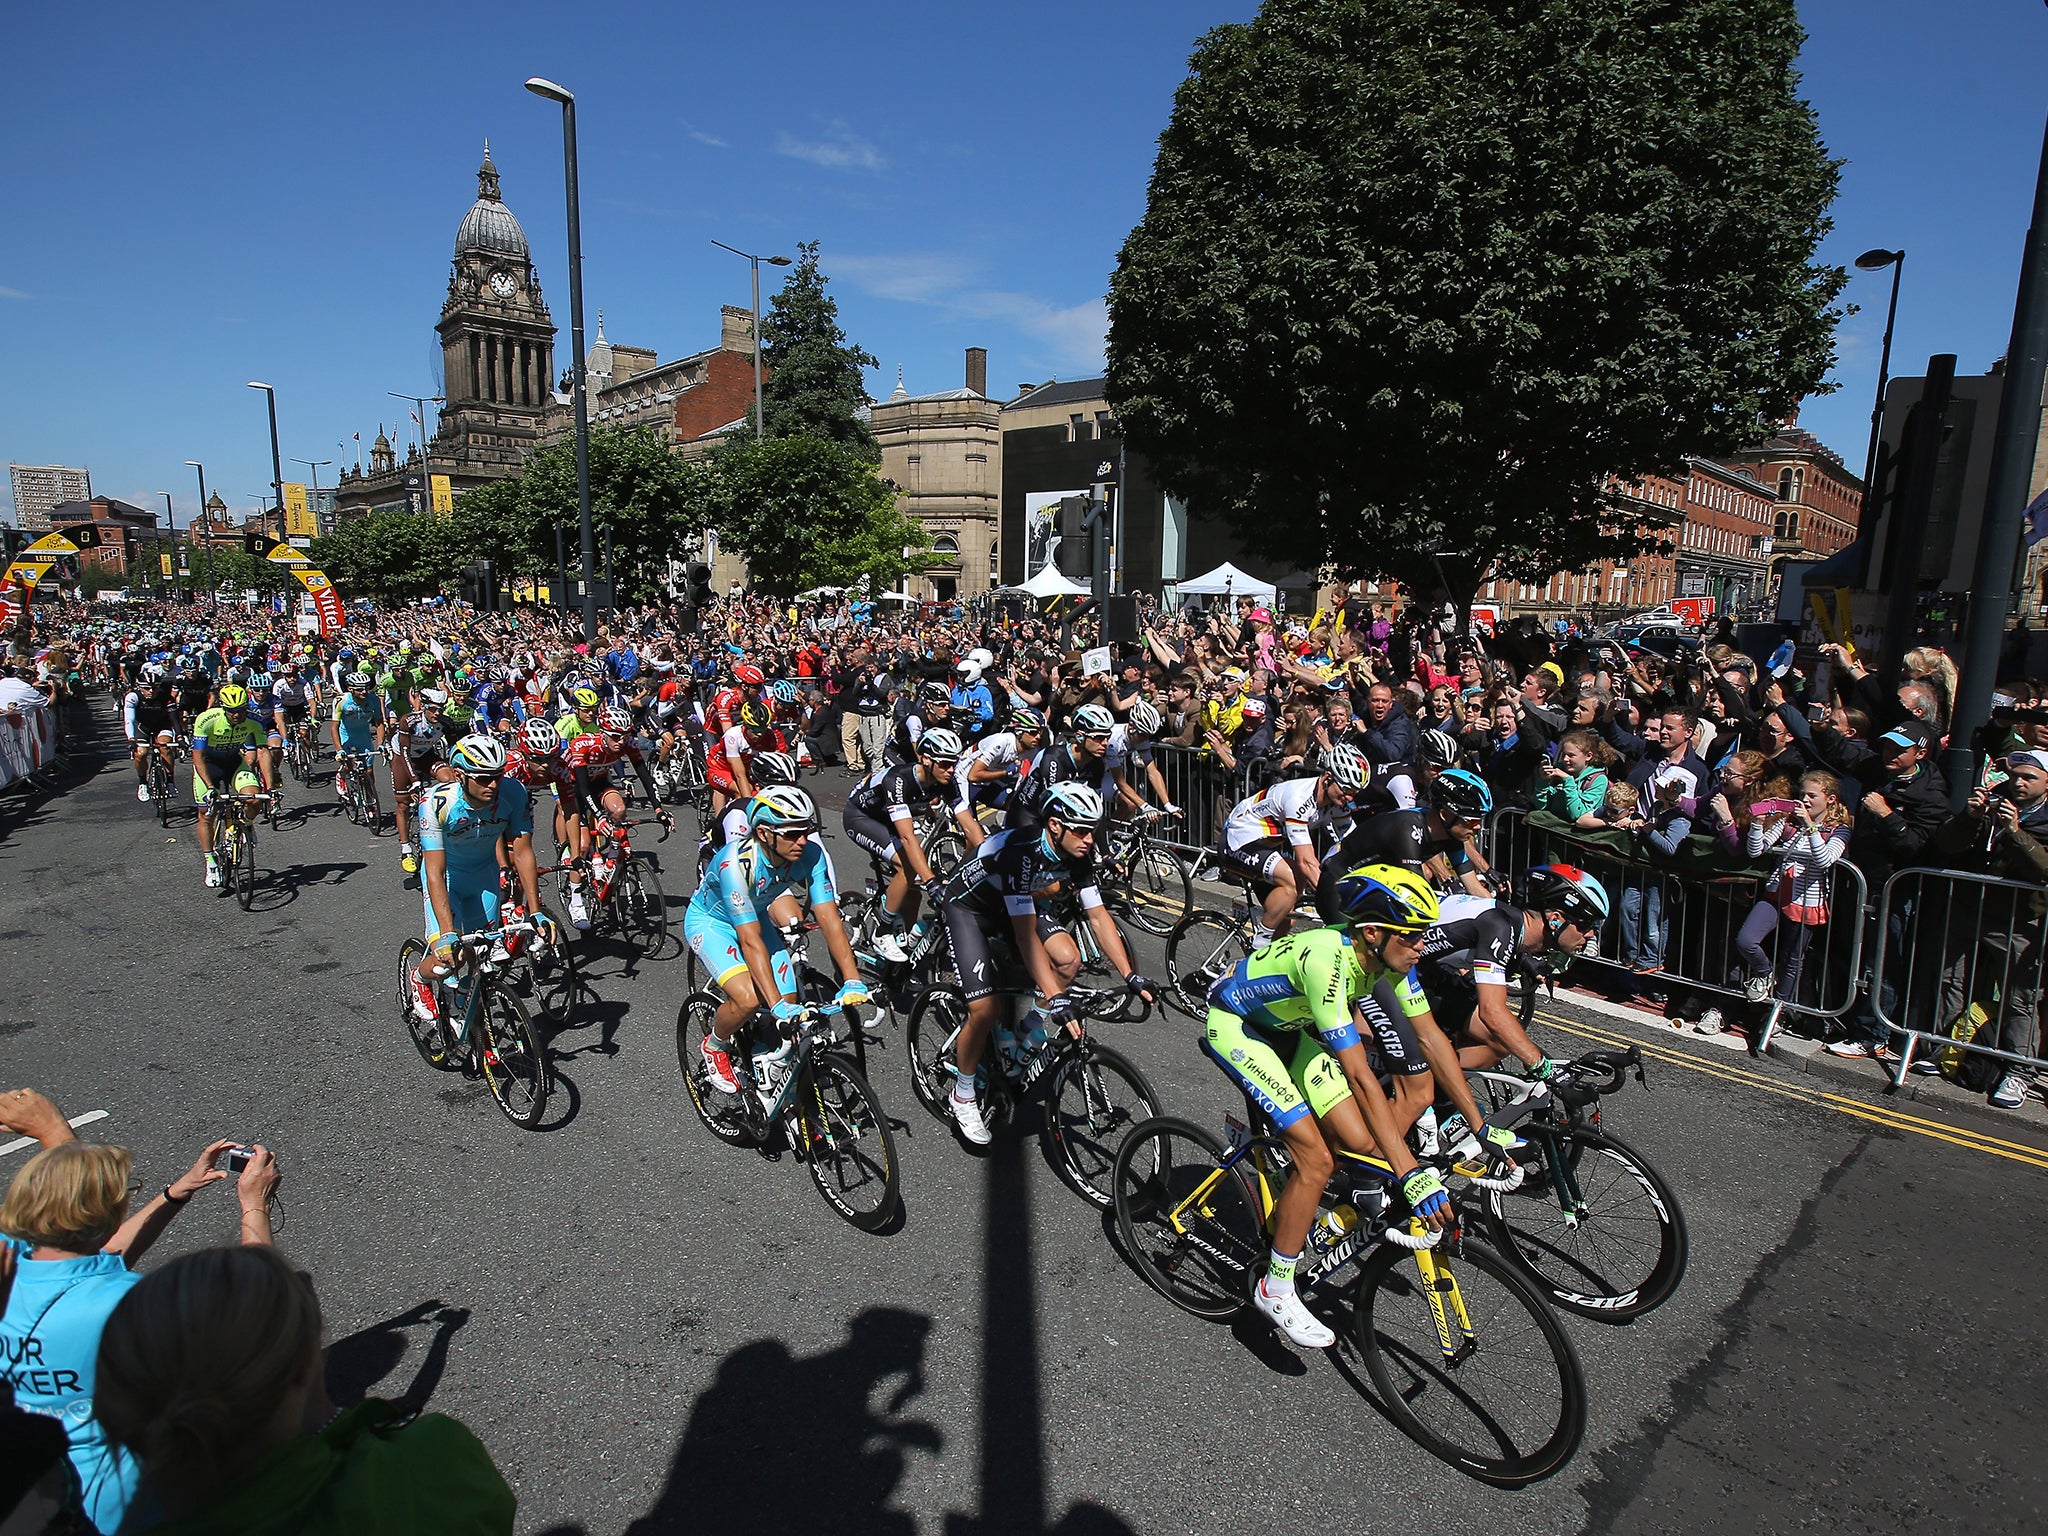 The race leaves the start for stage one of the 2014 Tour de France from Leeds to Harrogate